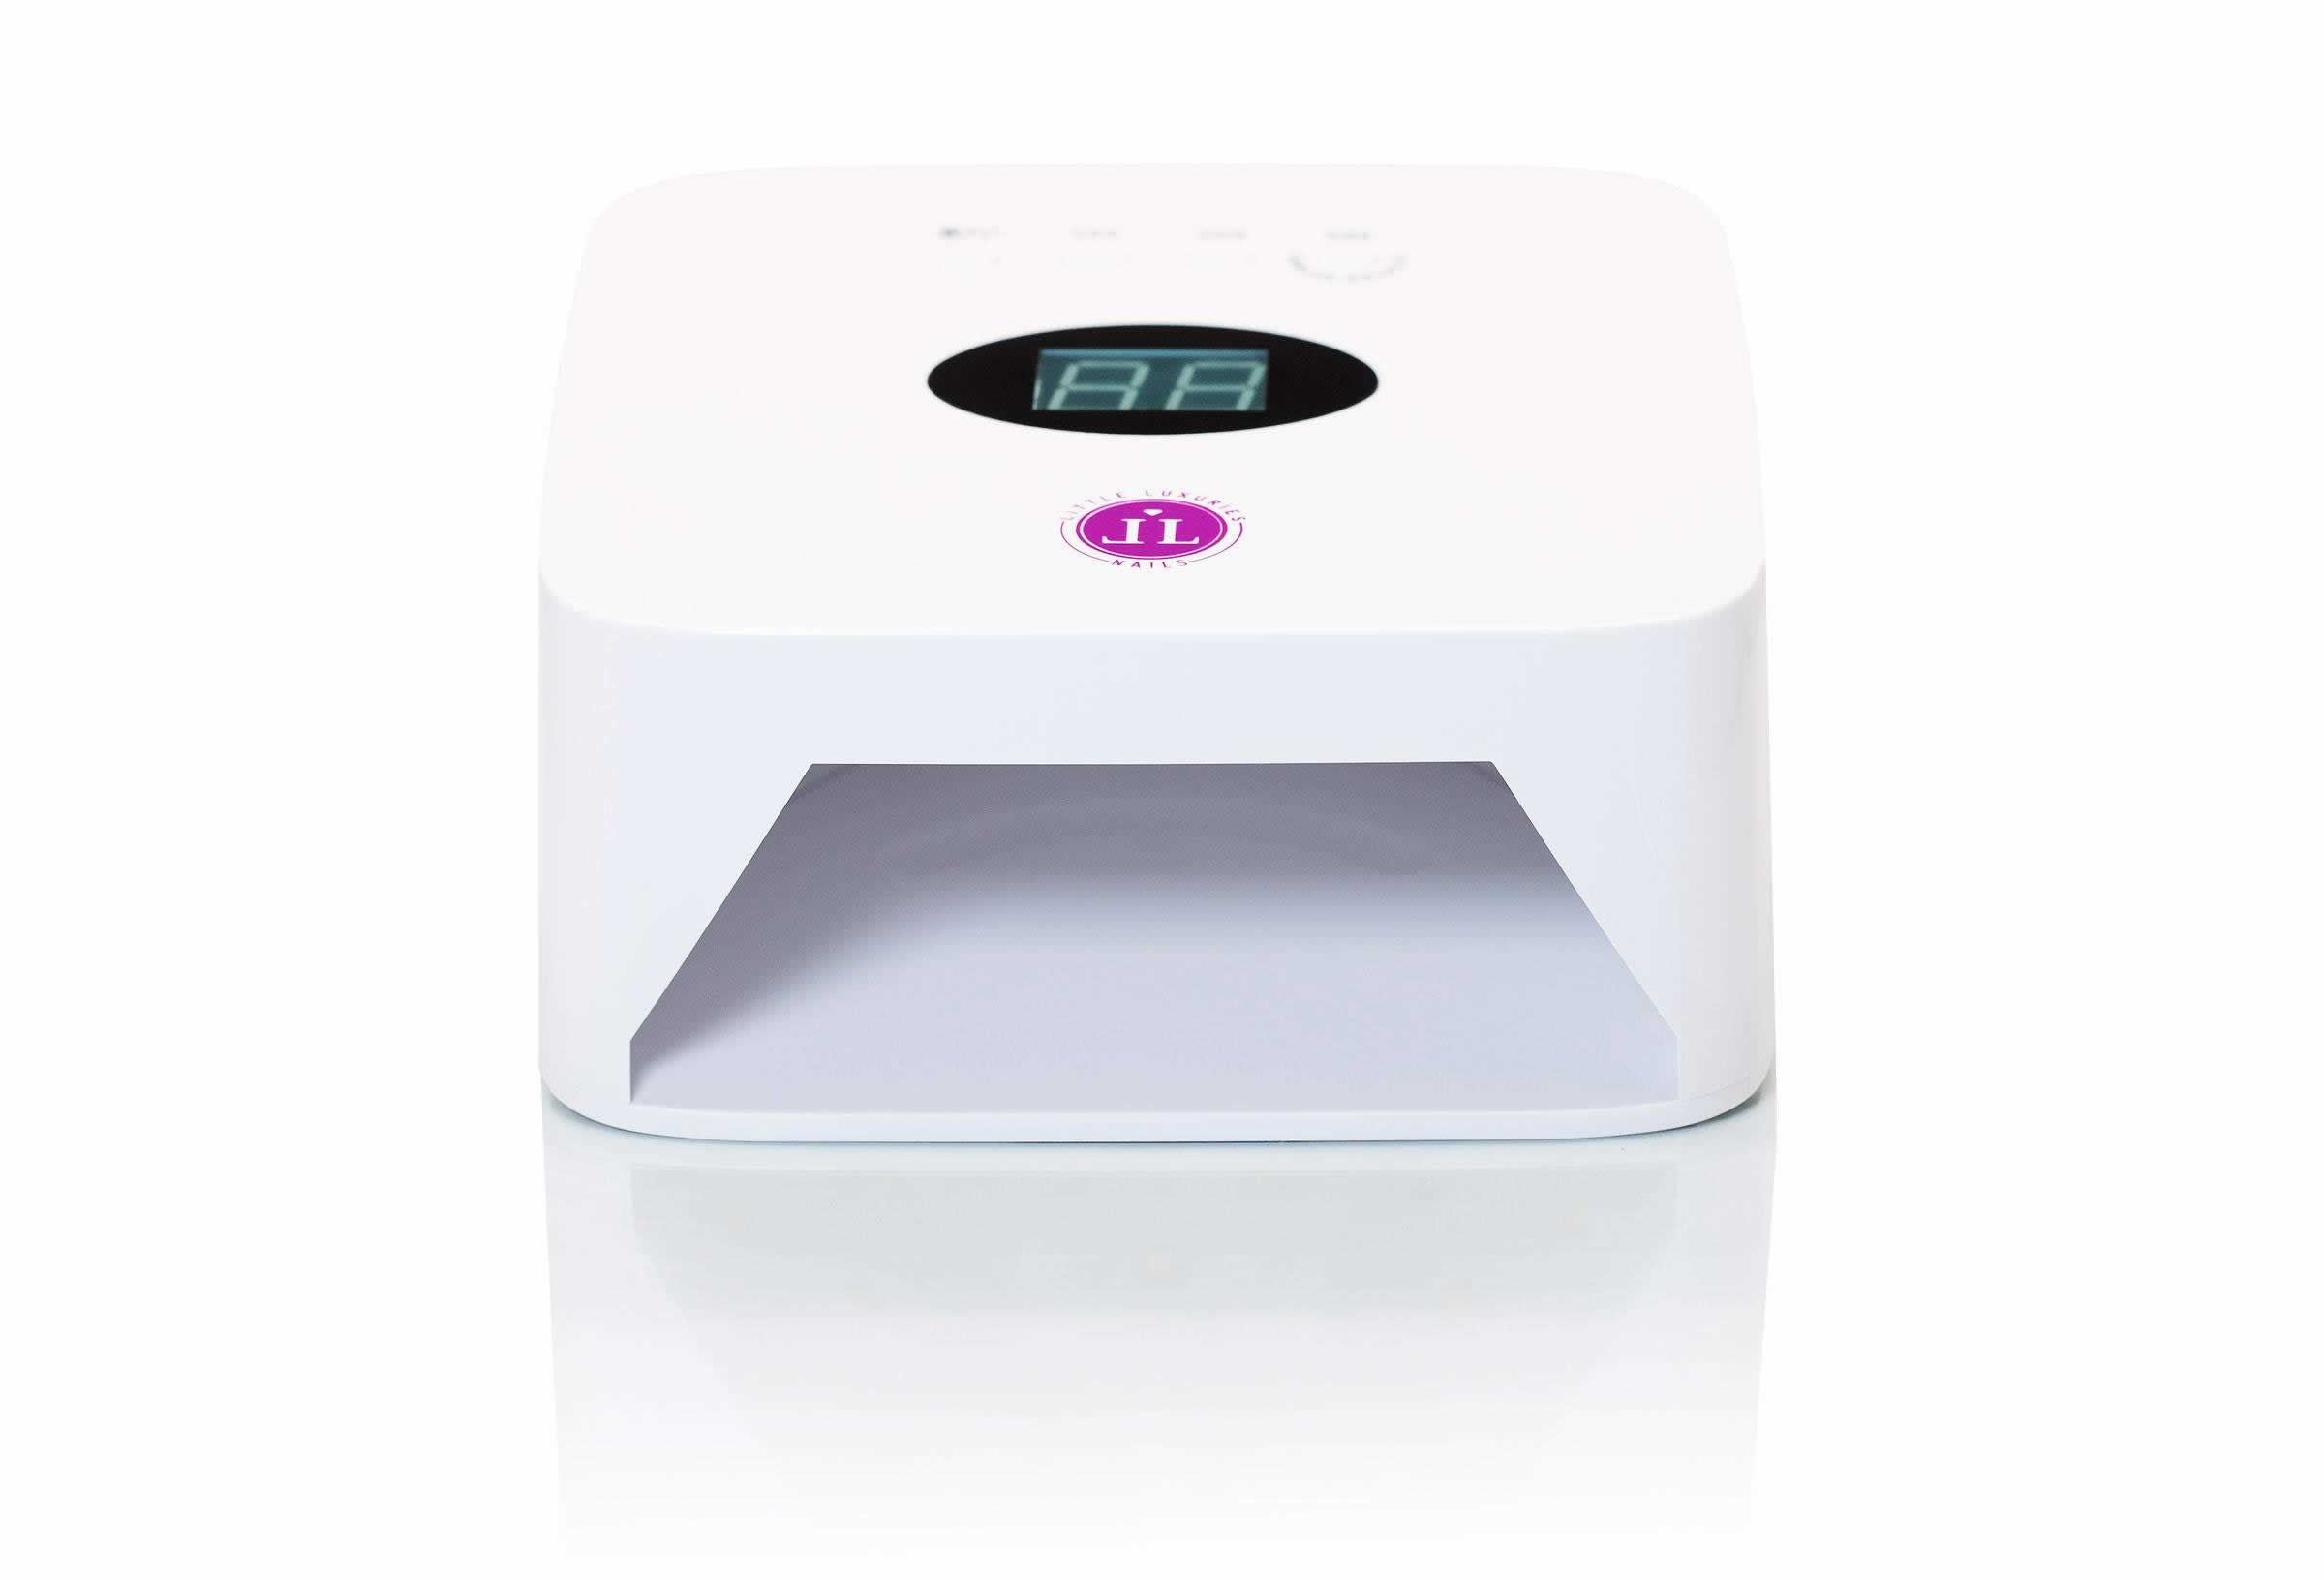 LED Powerful UV Nail Lamp With Large LCD Touch Screen Smart Sensor 4 Timer  Setting